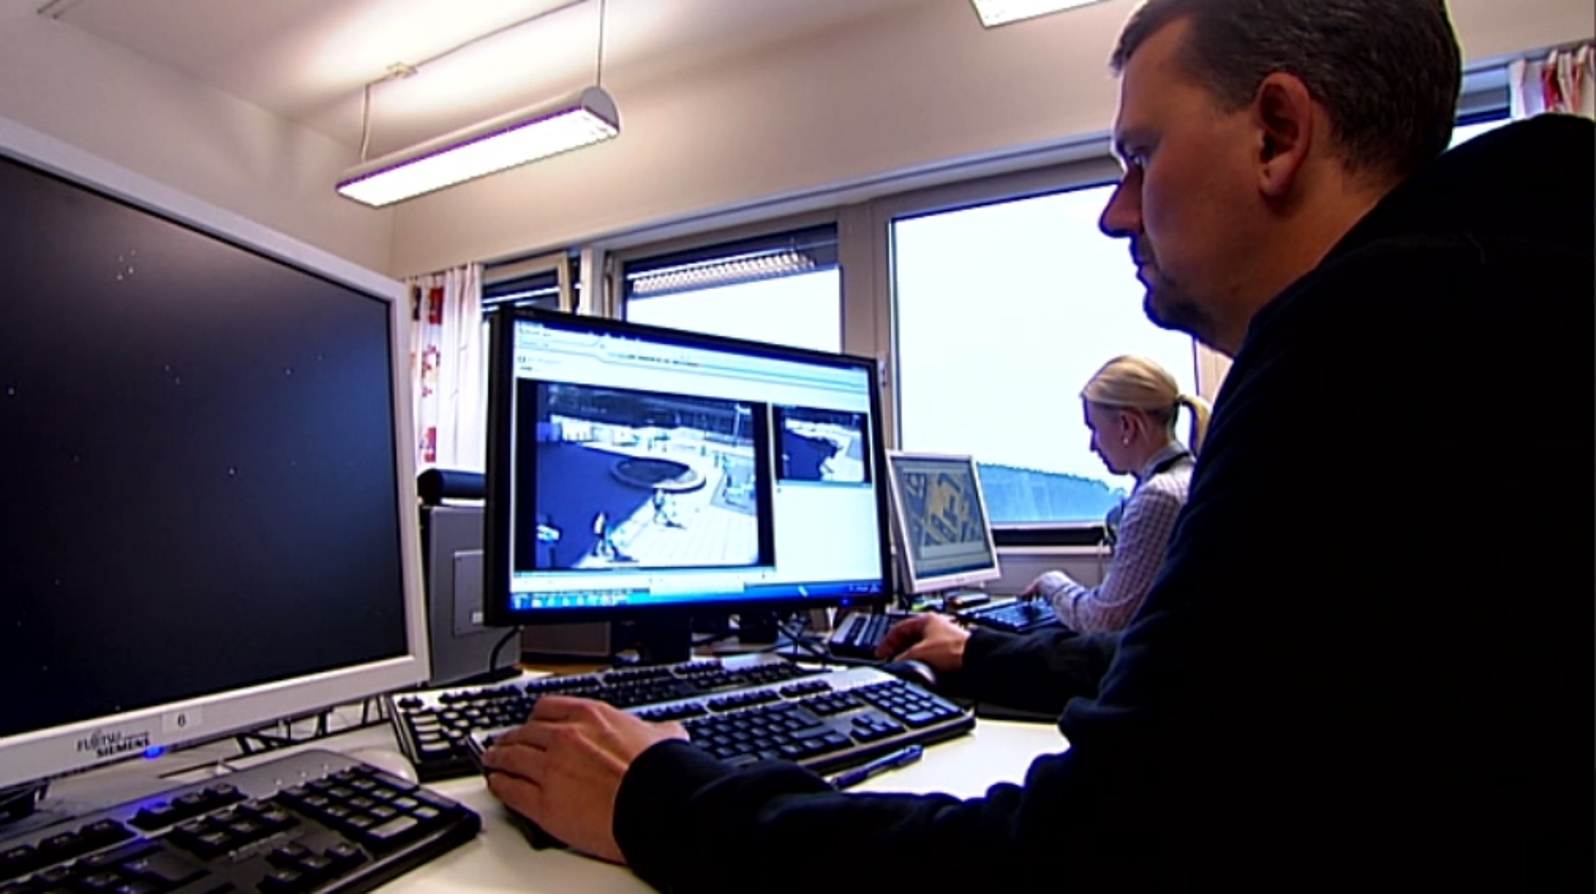 Norwegian investigators used BriefCam video synopsis technology to help them catch a bombing suspect in 2011. Photo courtesy of Norway TV 2 Nyhetskanalen